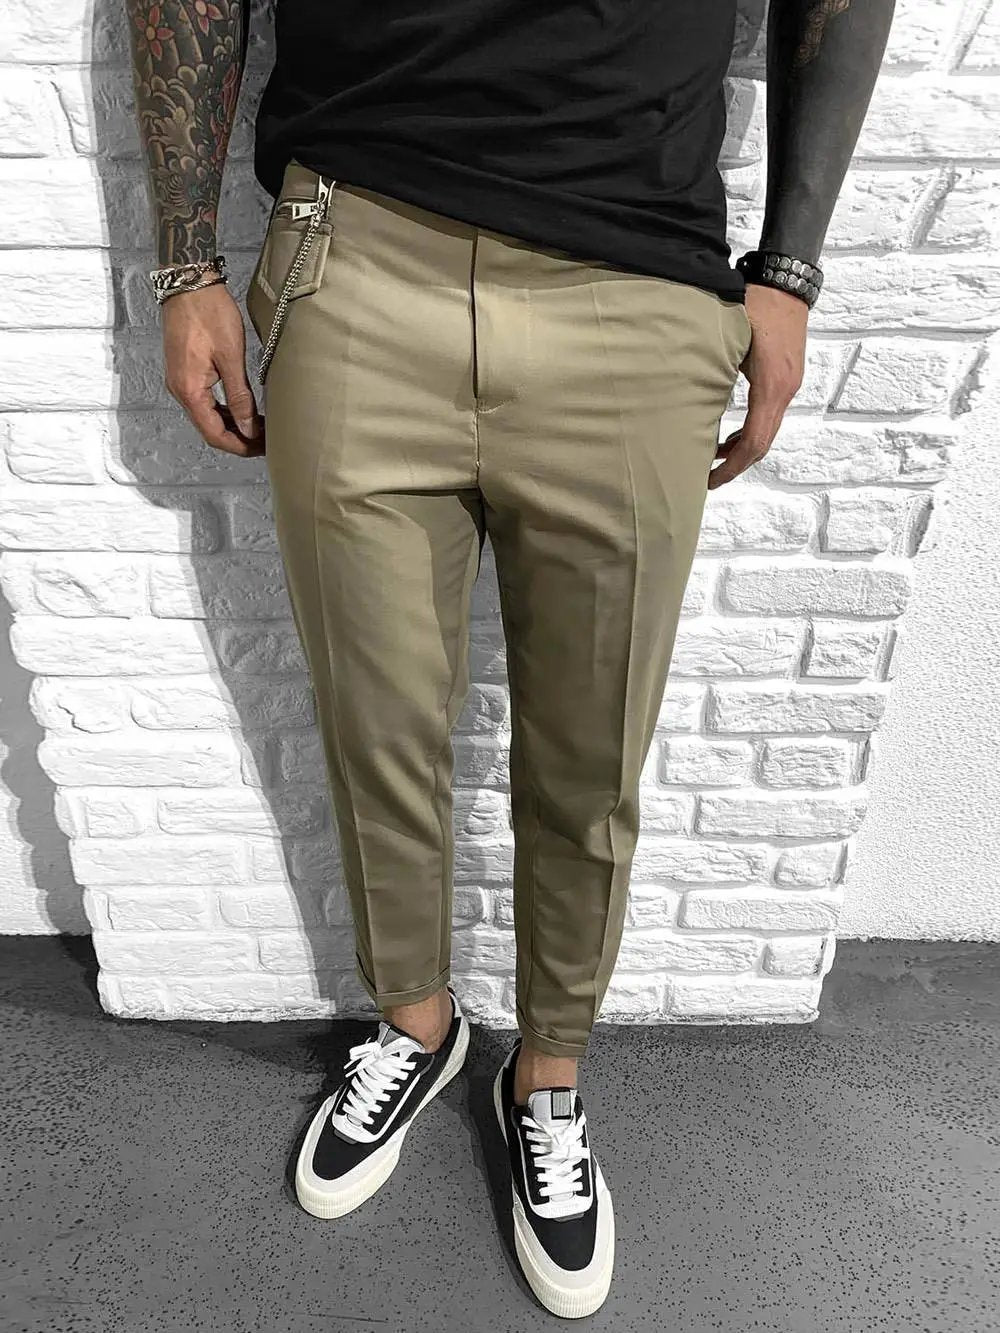 A man with hand crafted tattoos and khaki pants is standing next to a GENTLEMAN'S ROLL UP - BEIGE.